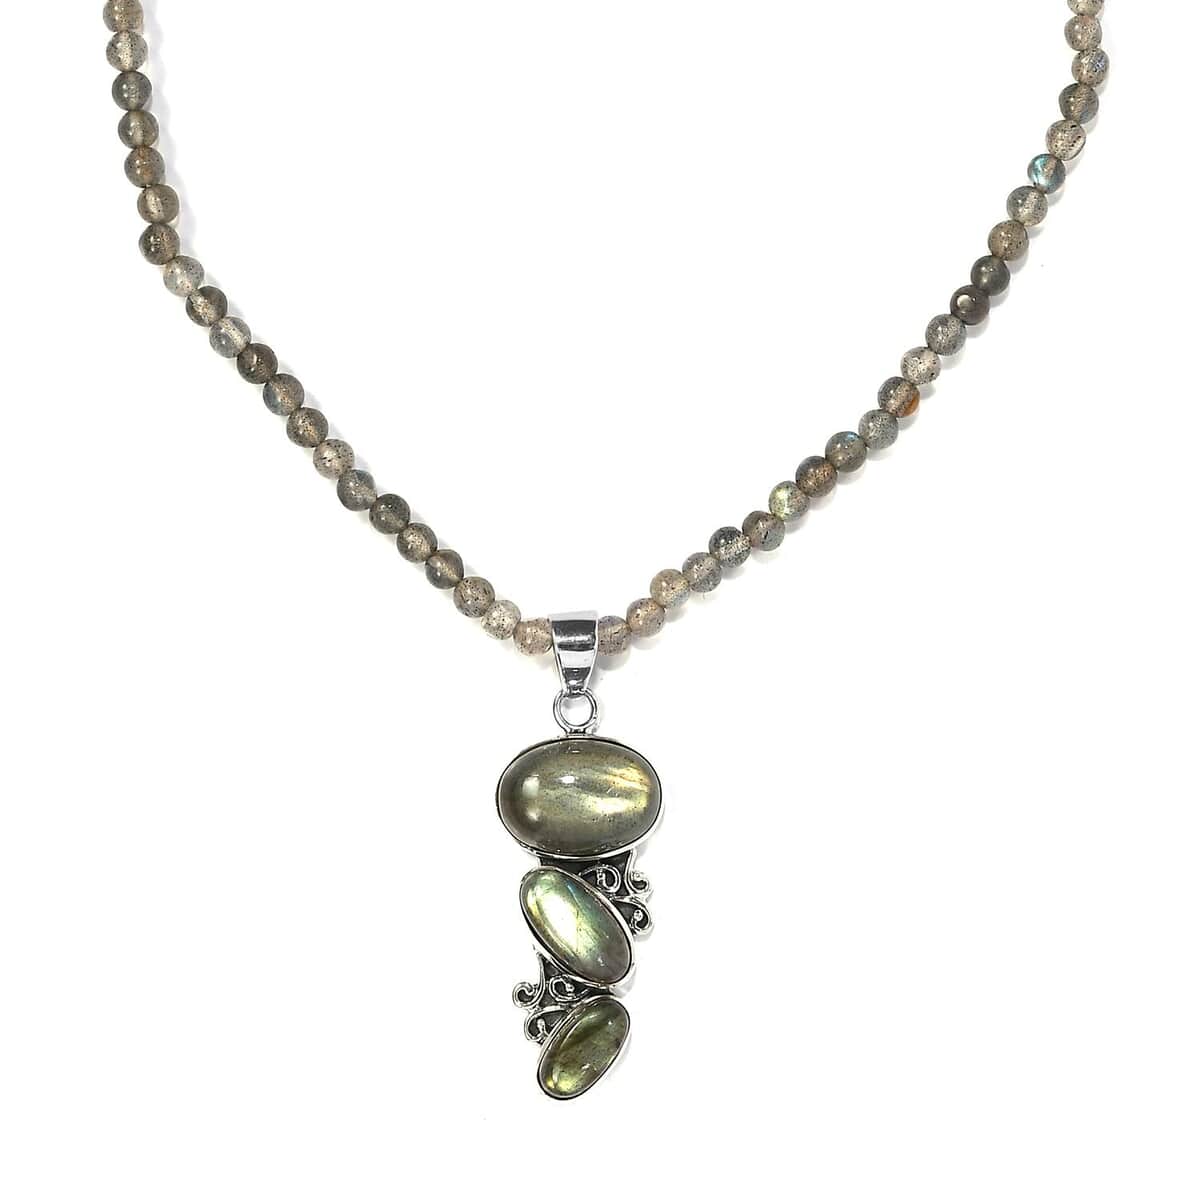 Malagasy Labradorite Bead Necklace in Sterling Silver, Labradorite Pendant, Silver Jewelry Gifts 53.85 ctw (20 Inches) image number 0